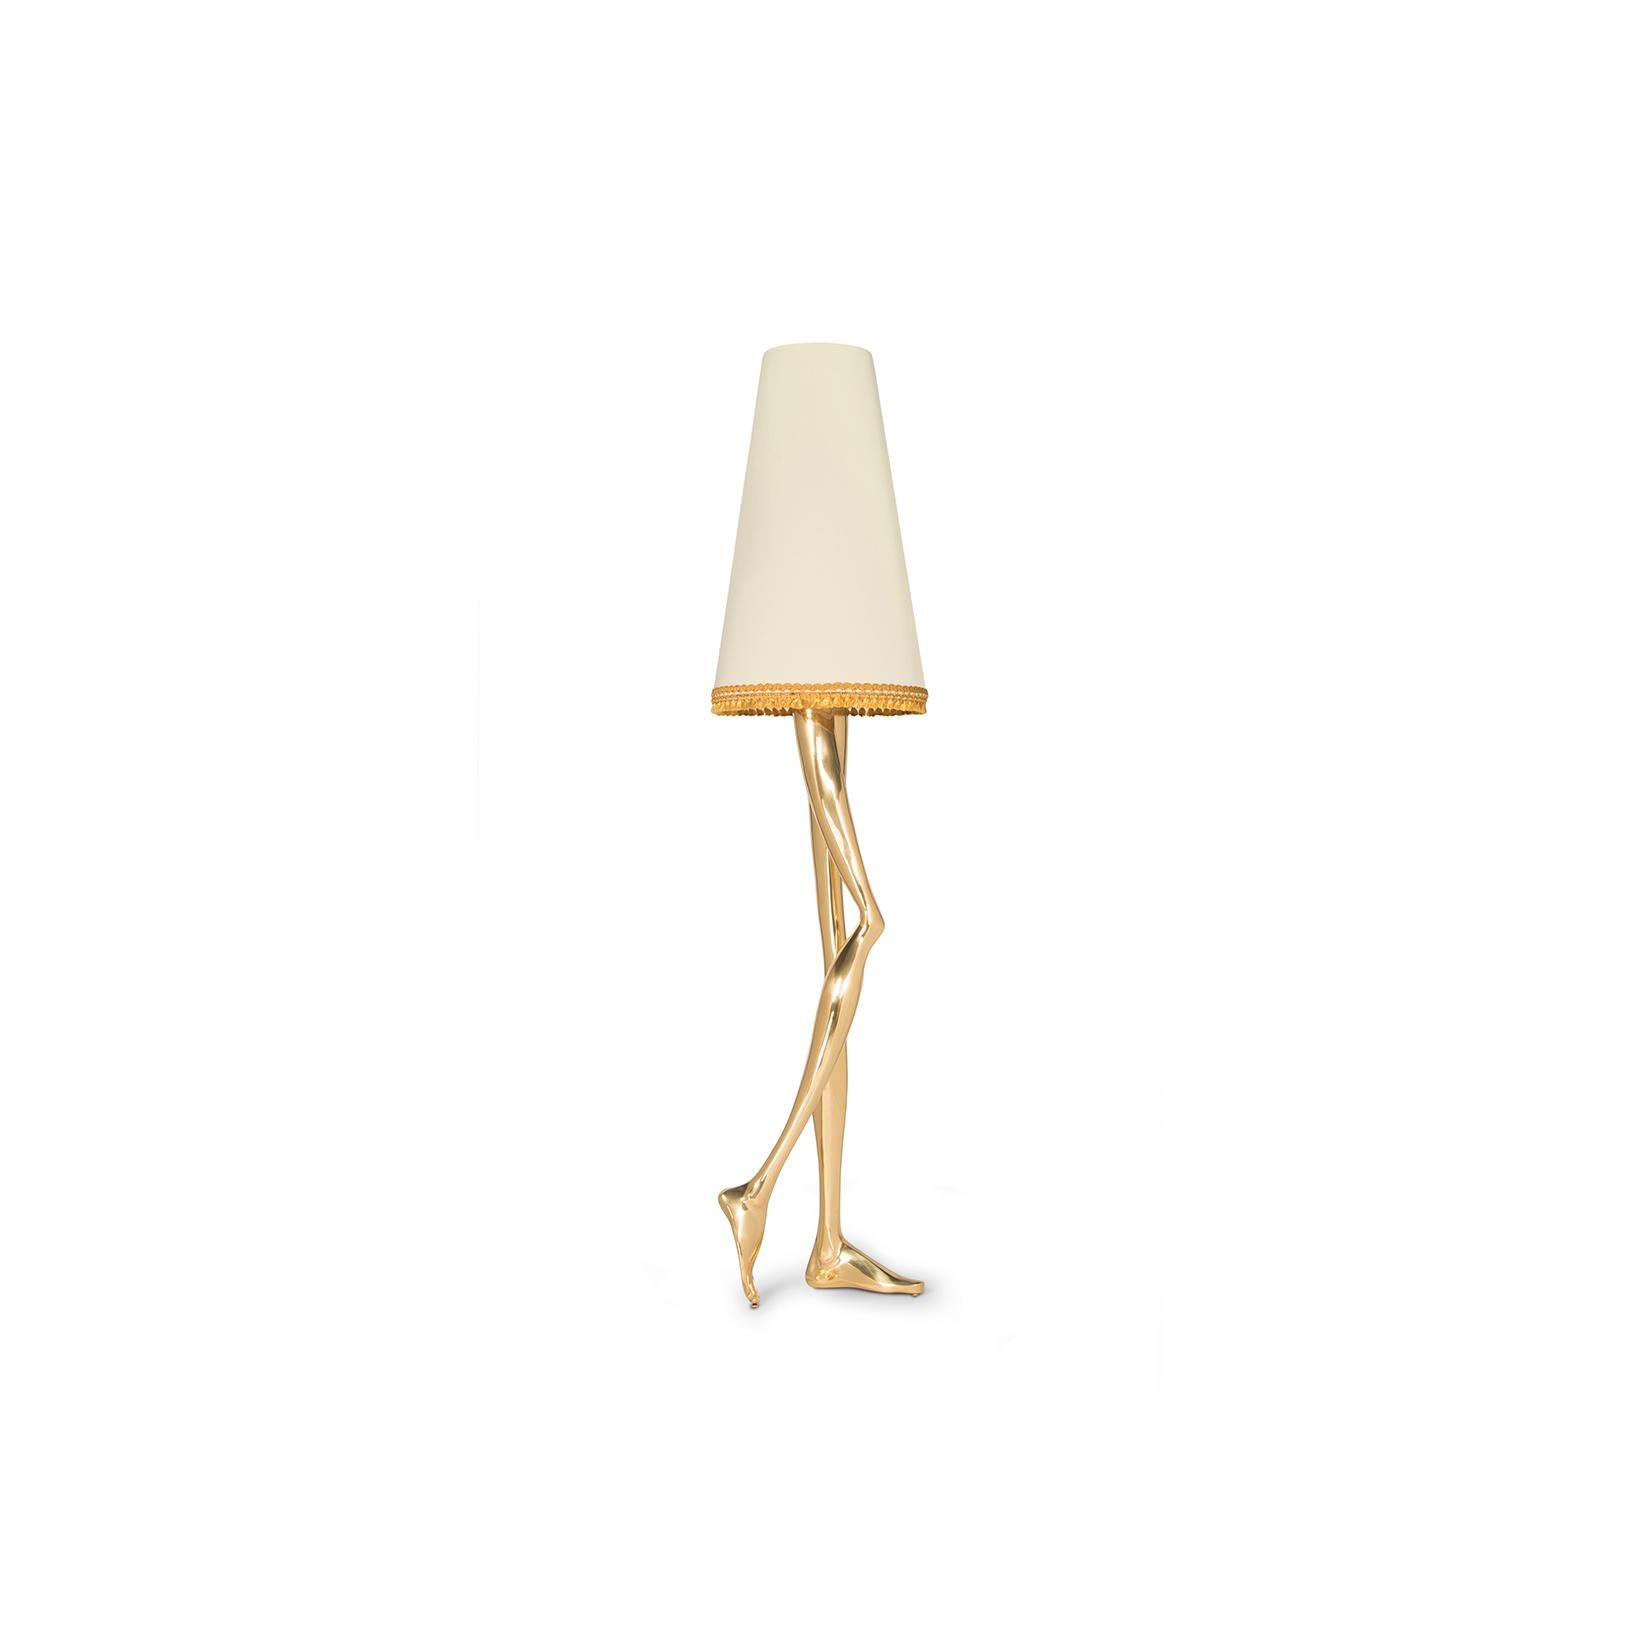 Contemporary Monroe Floor Lamp Polished Brass Cast, Blue Lampshade, Art Lighting In New Condition For Sale In Oporto, PT